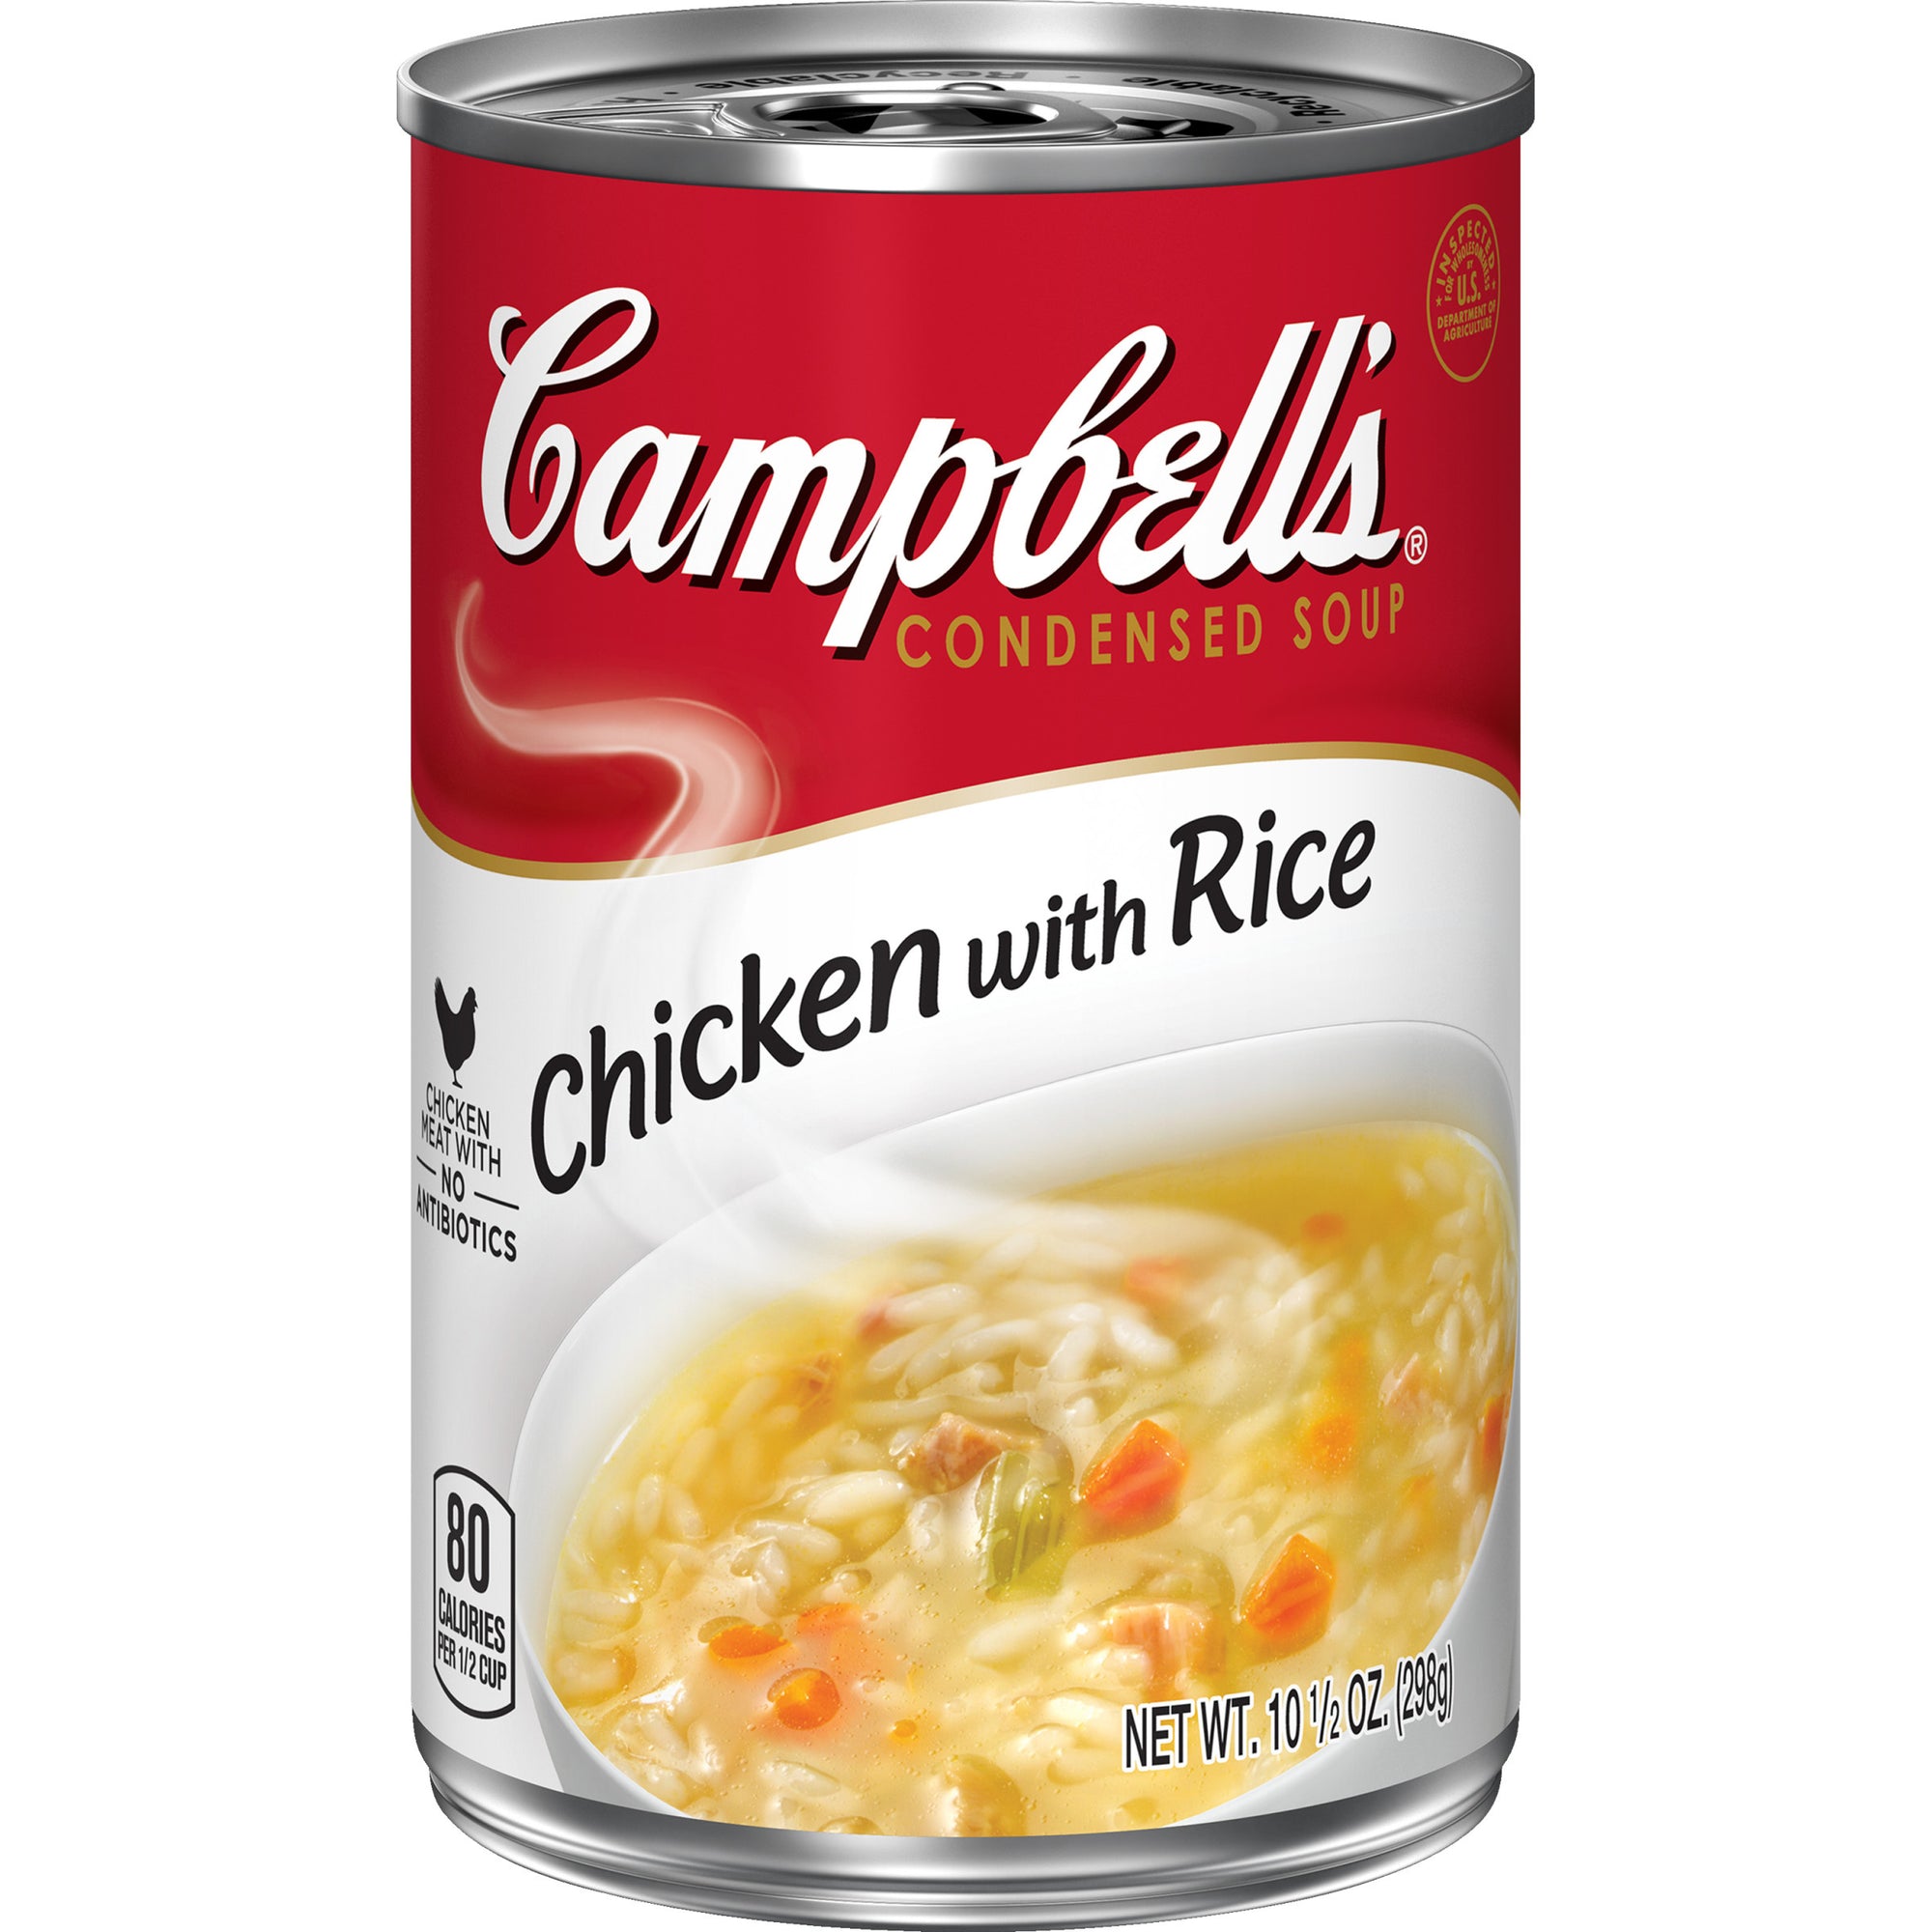 CAMPBELL'S CONDENSED SOUP RED & WHITE CHICKENAND RICE, 12 - 10.5 OZ